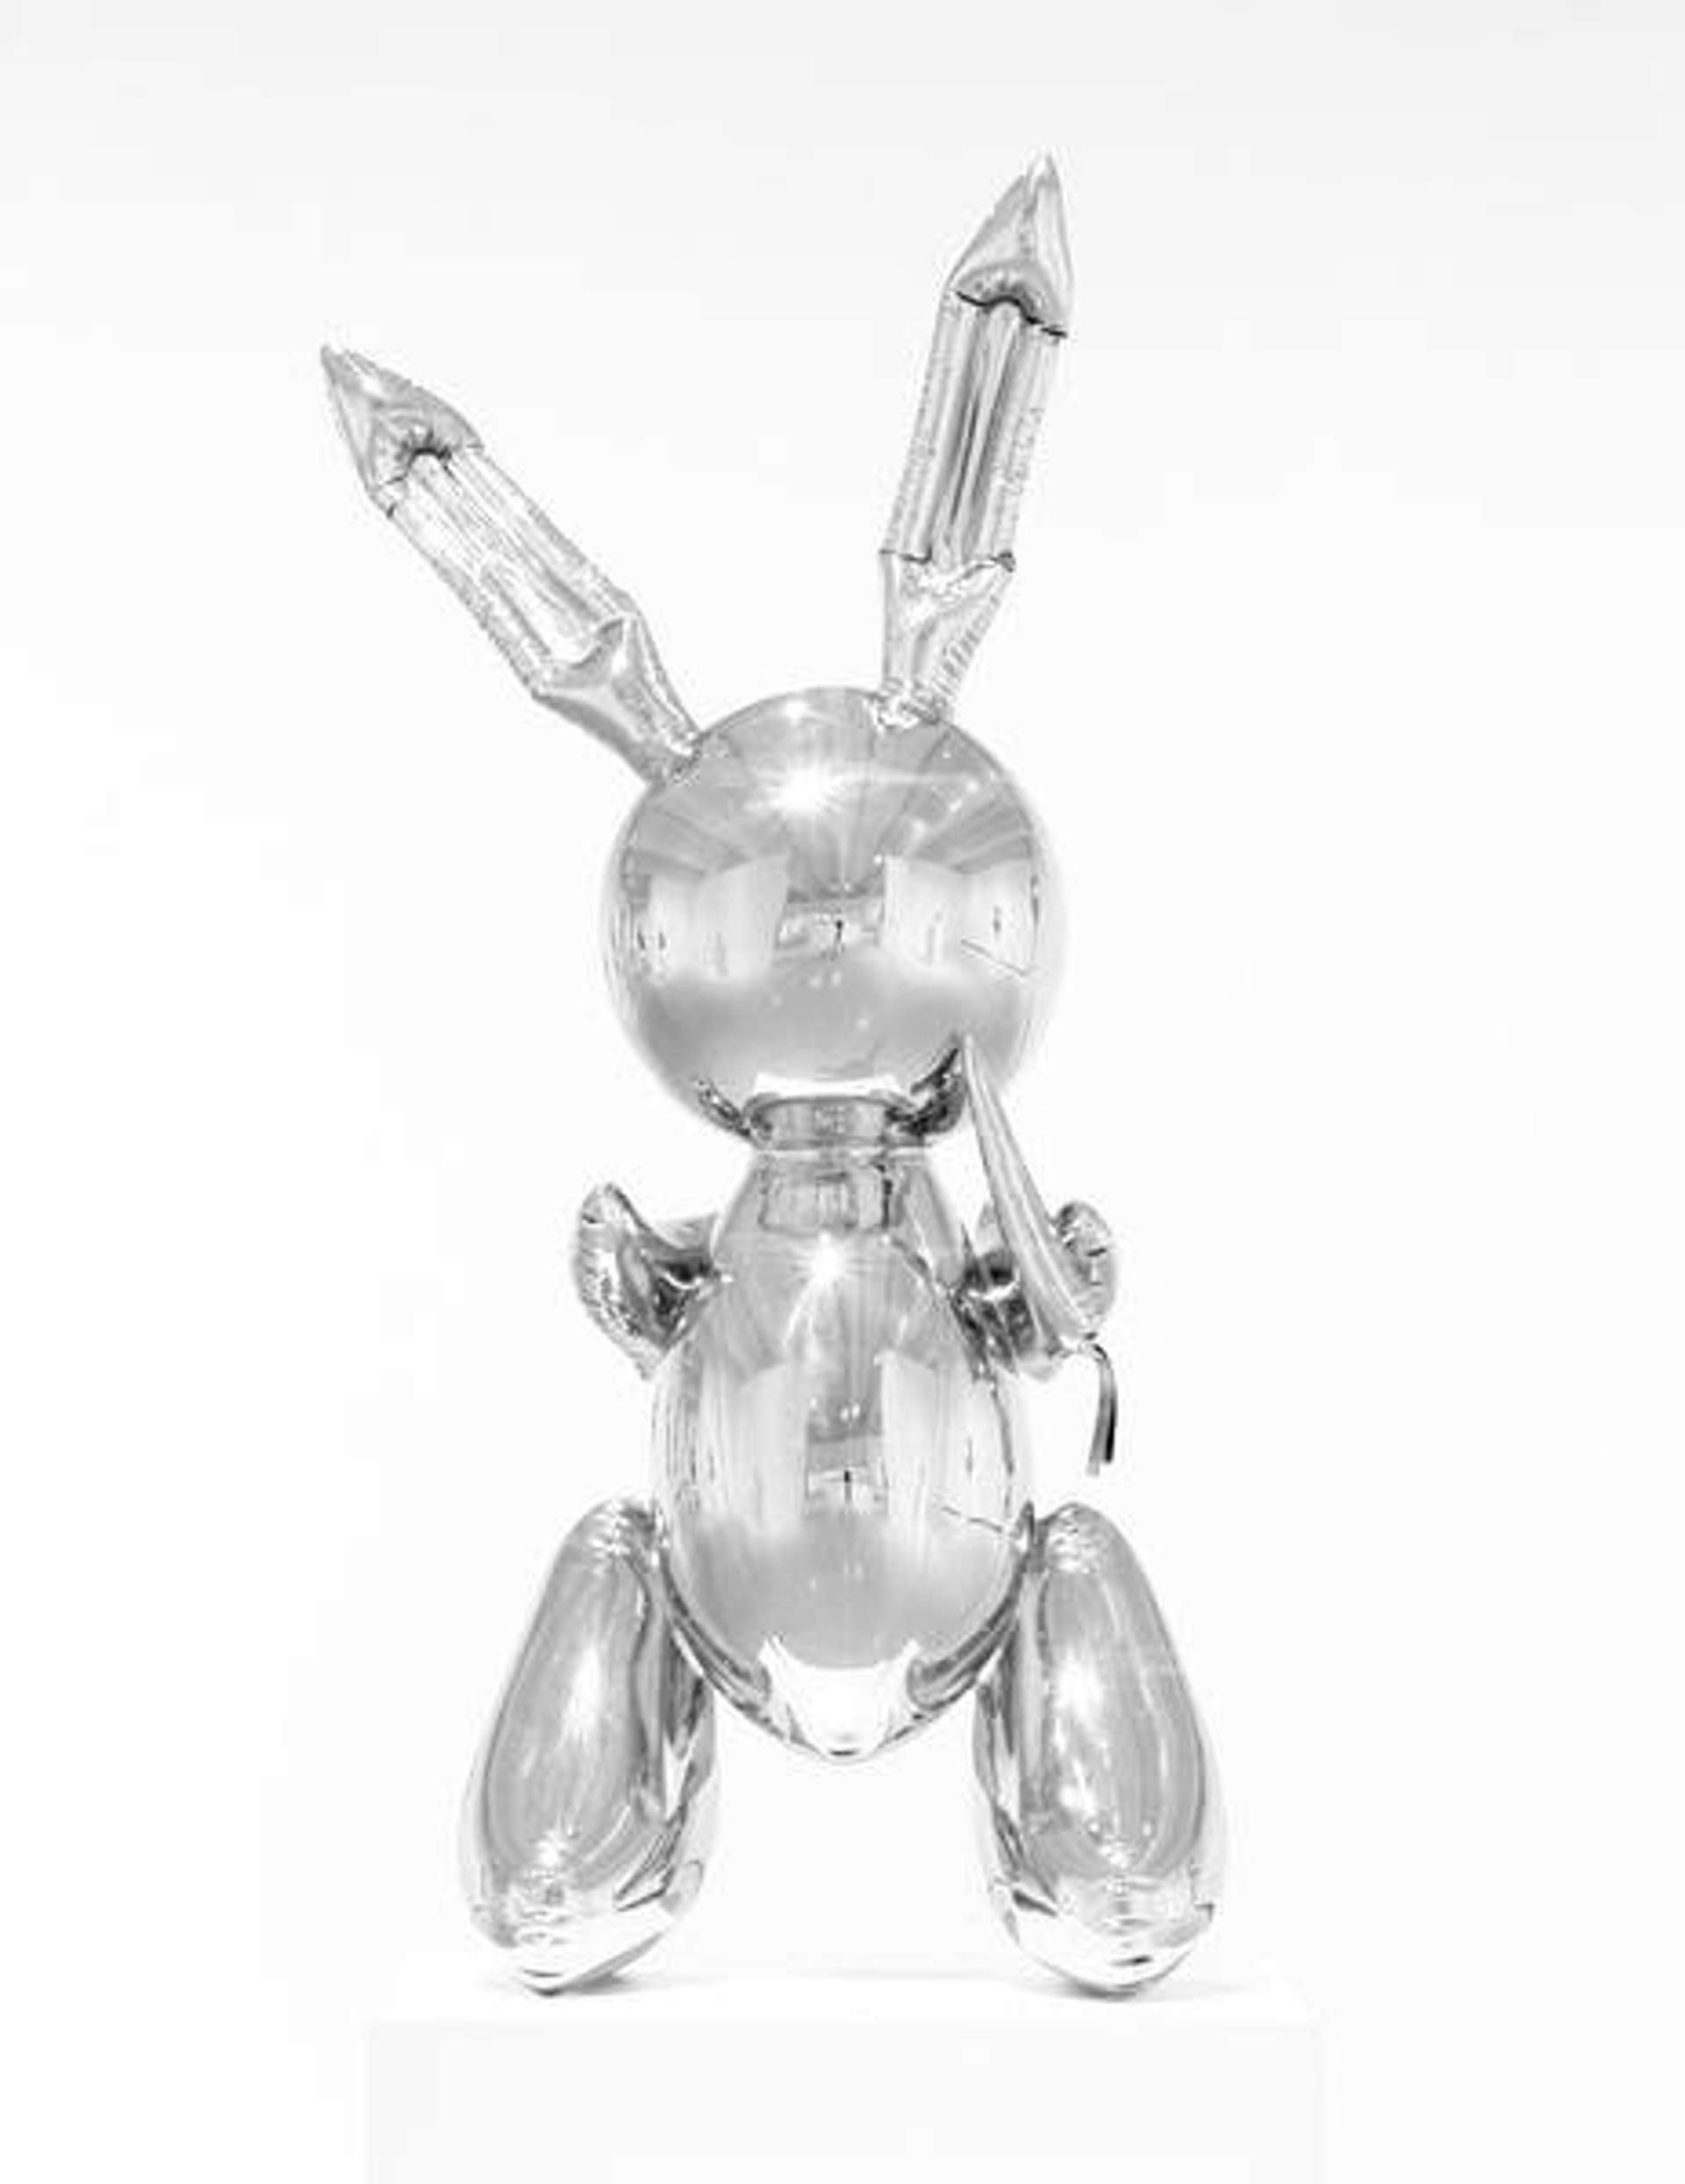 An image of the artwork Rabbit by Jeff Koons. It shows a colossal reflective silver rabbit, similar to a balloon toy.